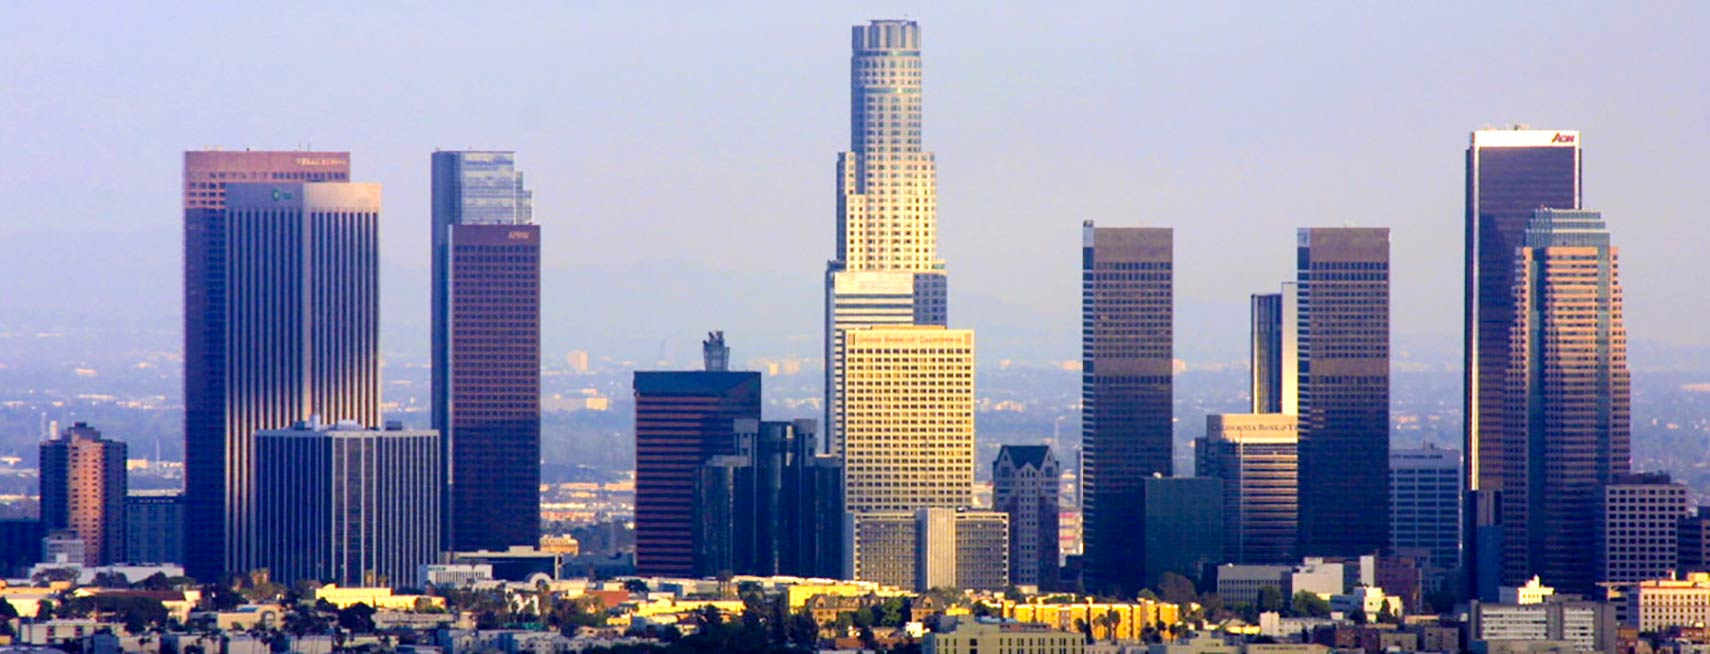 Google Map Of The City Los Angeles, Usa - Nations Online Project - La California Google Maps